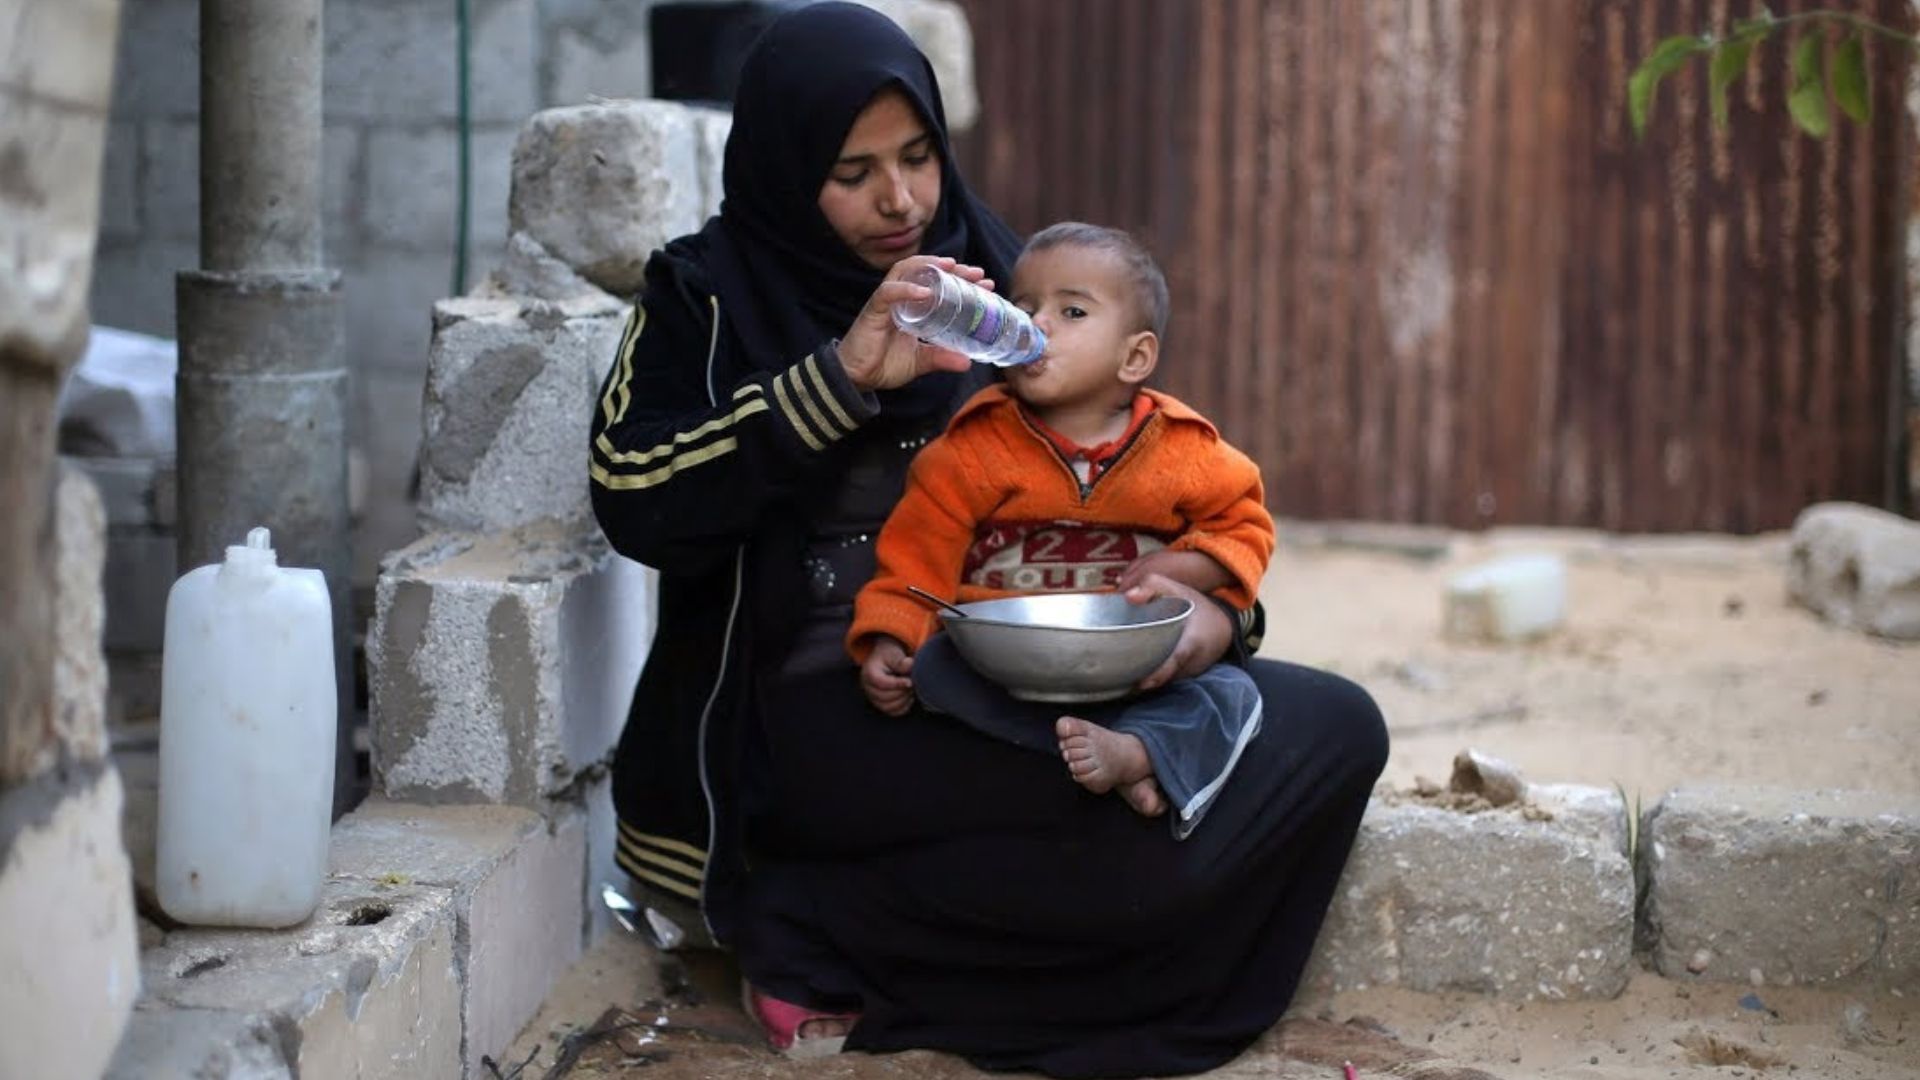 Pregnant Women and Babies Drink Salty Water in Gaza Due to Israeli Blockade